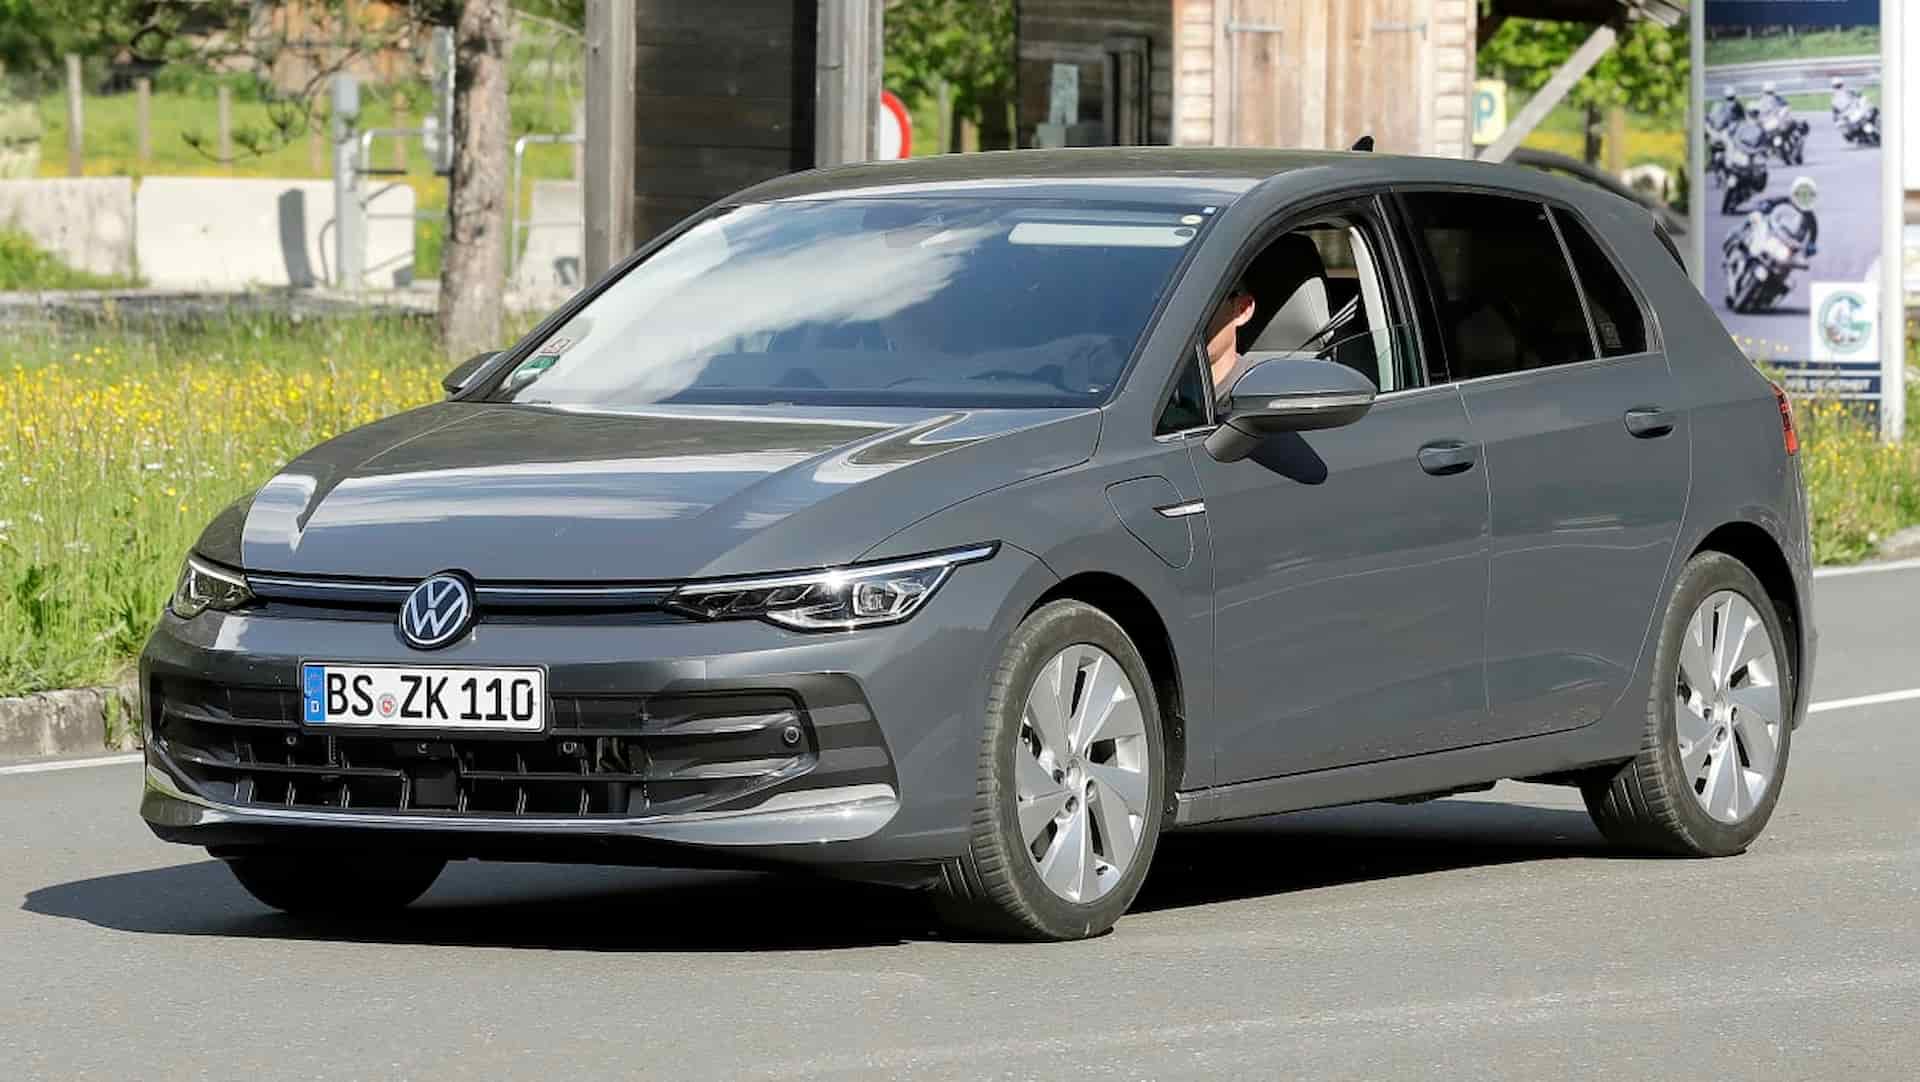 Facelifted Volkswagen Golf 002 rurgzq